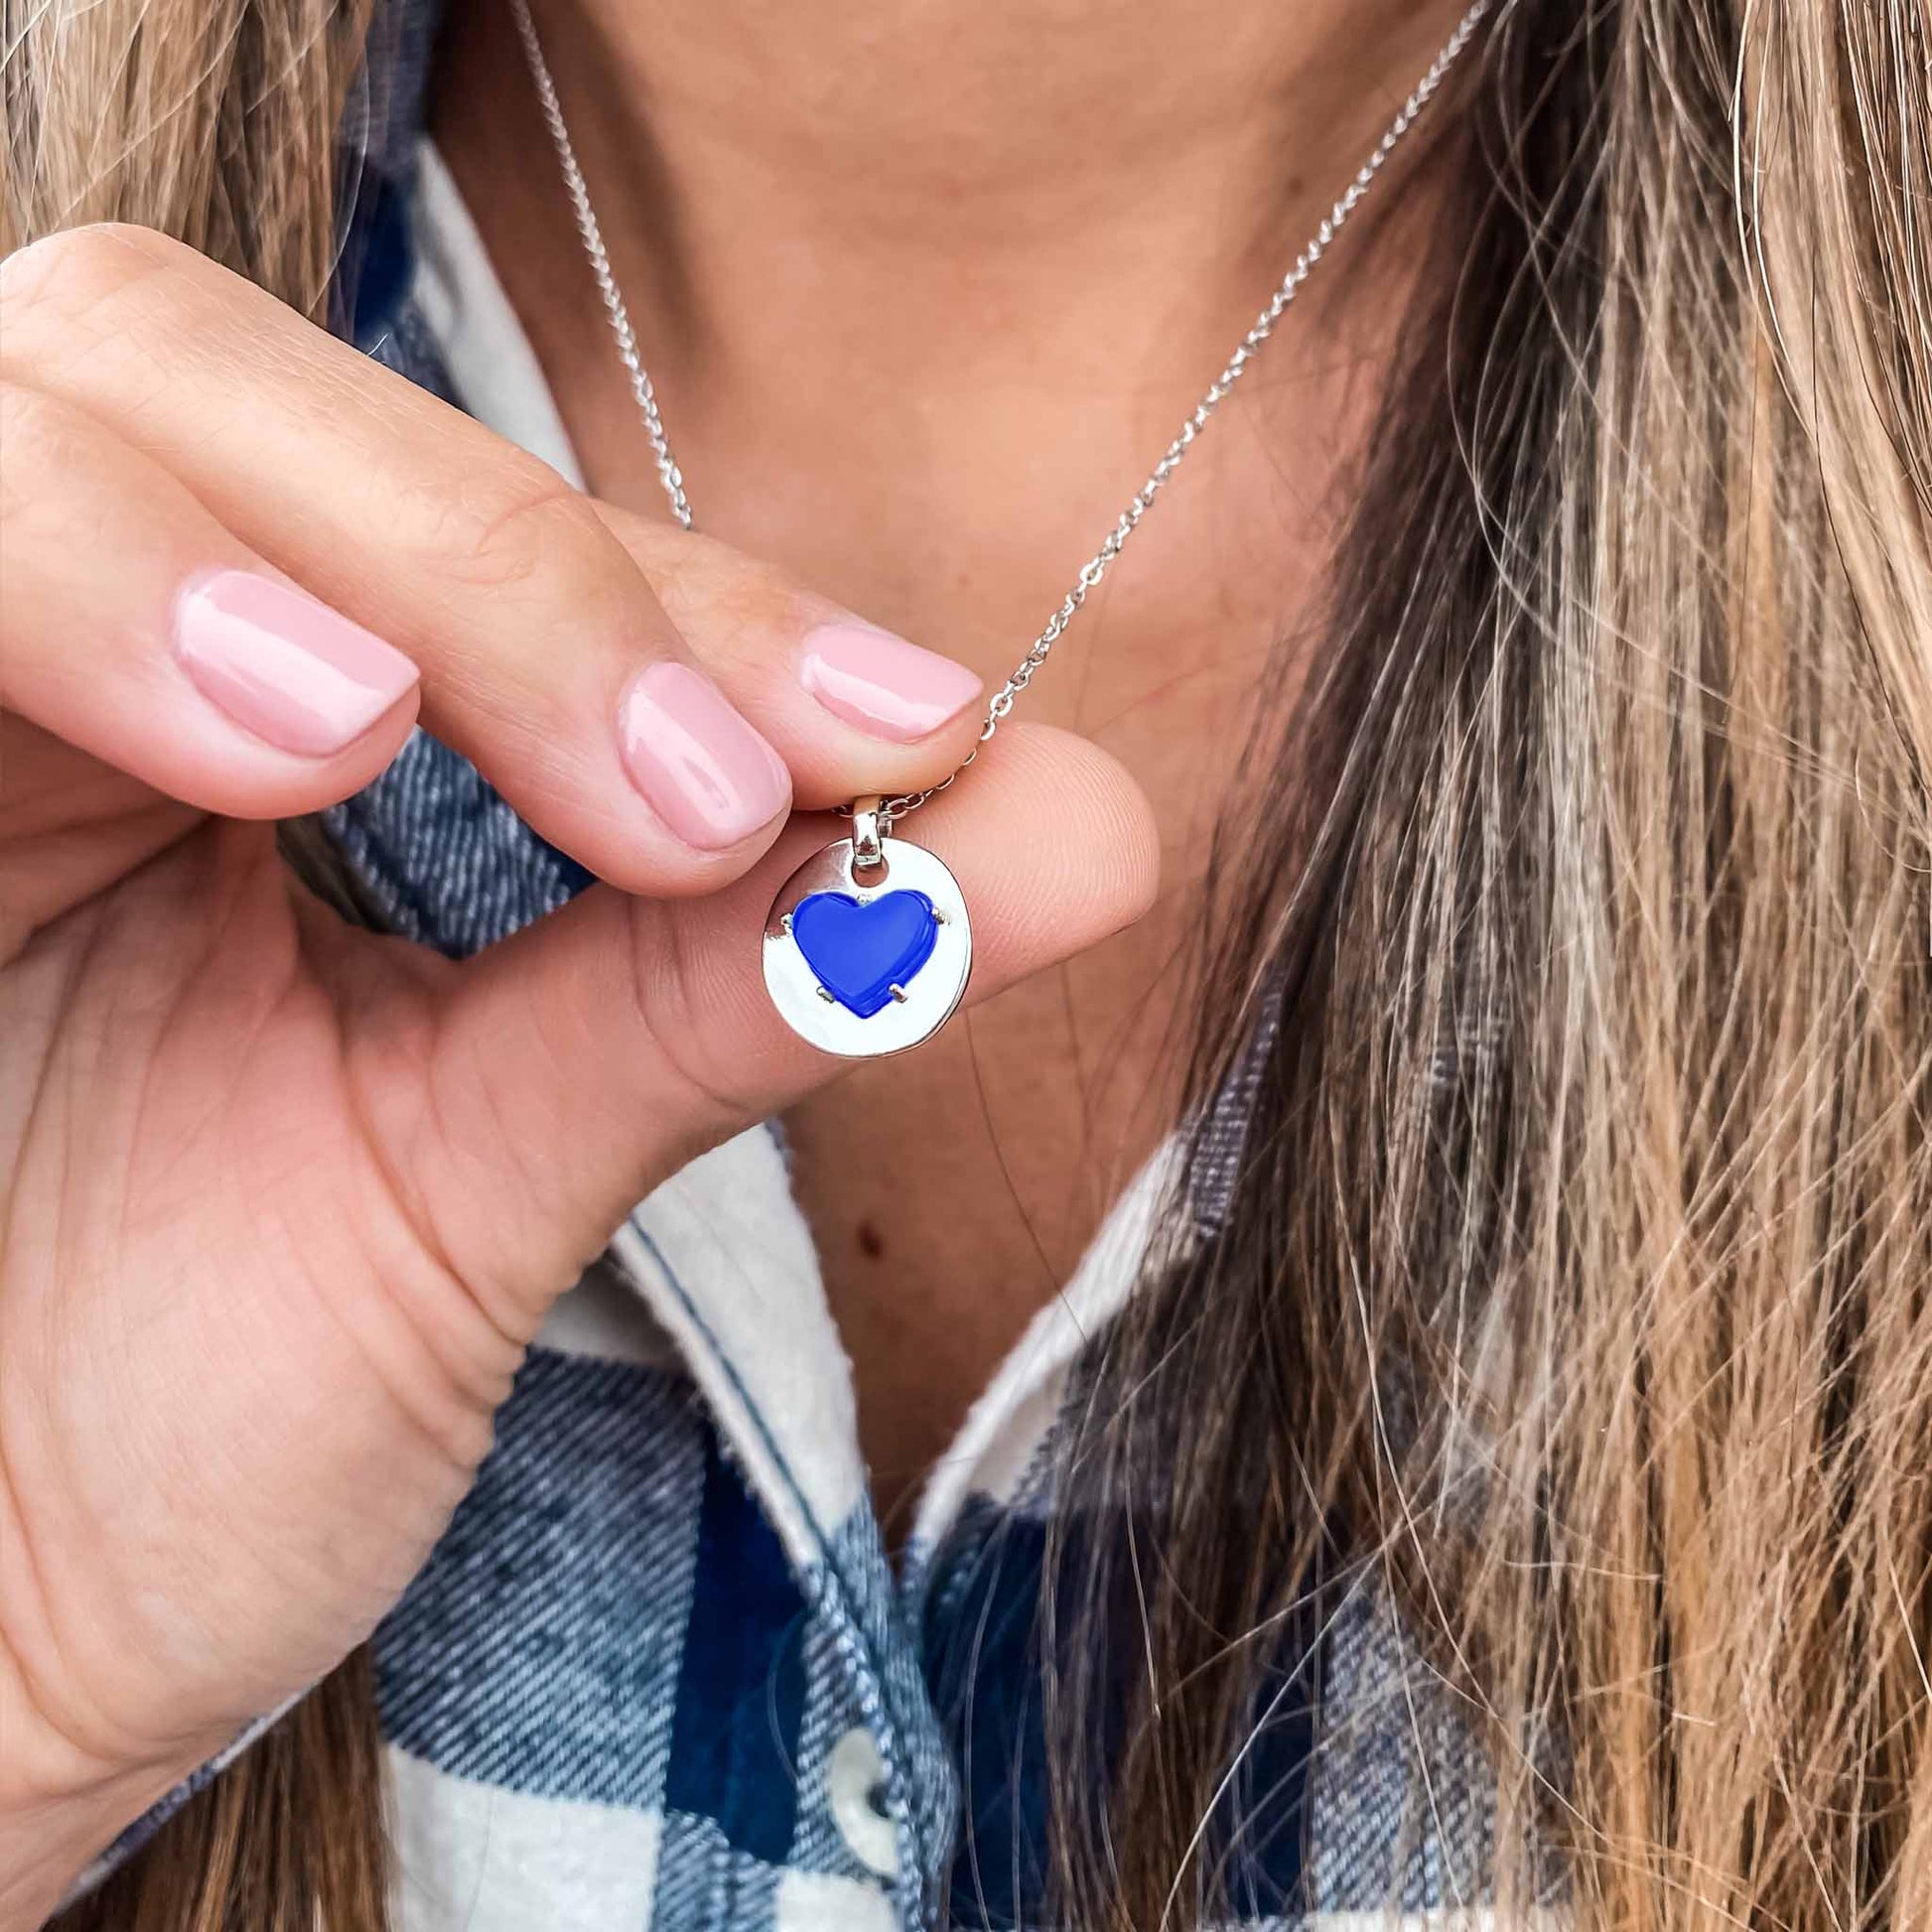 Sapphire is September's birthstone and the gem for the 5th & 45th wedding anniversaries. This charm necklace is the perfect gift for yourself, Mother's Day, Valentine's Day, graduation, Christmas and birthdays. A personalized gift for every mom, grandma, bride, bridesmaid, daughter, wife, mother-in-law & loved one.